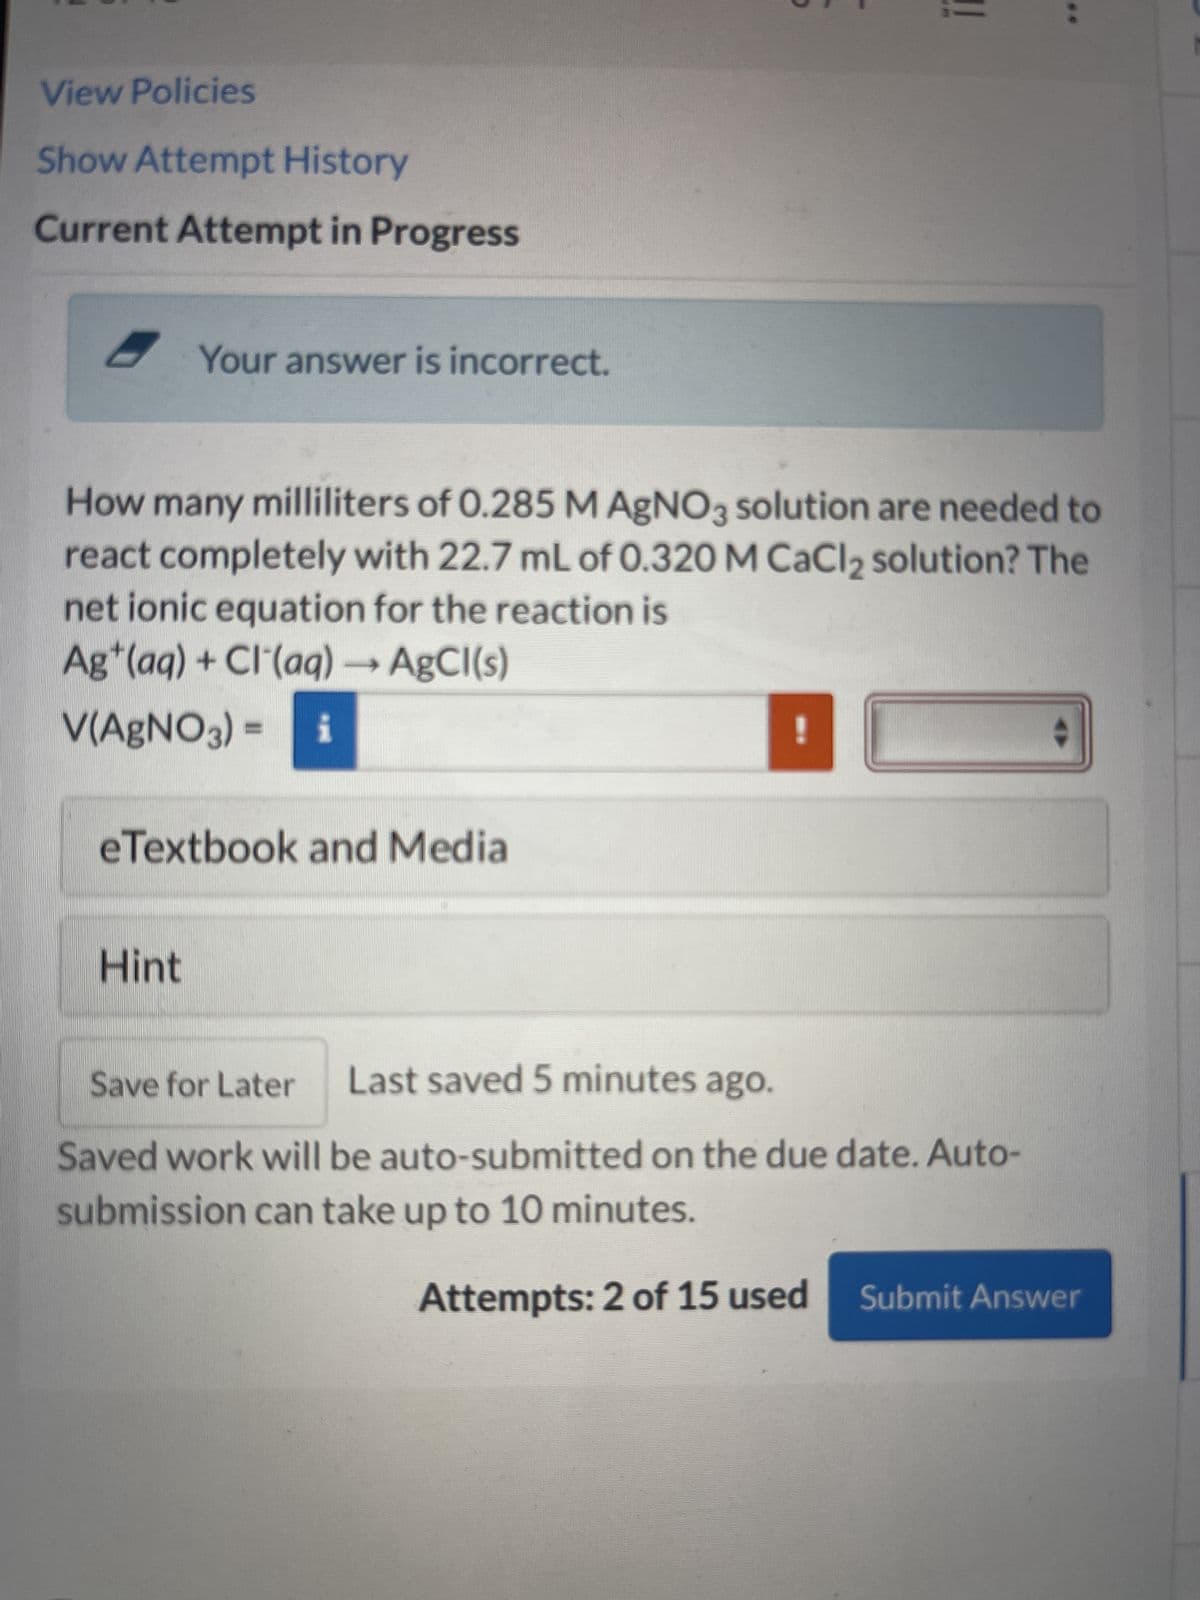 View Policies
Show Attempt History
Current Attempt in Progress
Your answer is incorrect.
How many milliliters of 0.285 M AgNO3 solution are needed to
react completely with 22.7 mL of 0.320 M CaCl₂ solution? The
net ionic equation for the reaction is
Ag+ (aq) + Cl(aq) → AgCl(s)
V(AgNO3) = i
eTextbook and Media
Hint
Save for Later
Last saved 5 minutes ago.
Saved work will be auto-submitted on the due date. Auto-
submission can take up to 10 minutes.
Attempts: 2 of 15 used Submit Answer